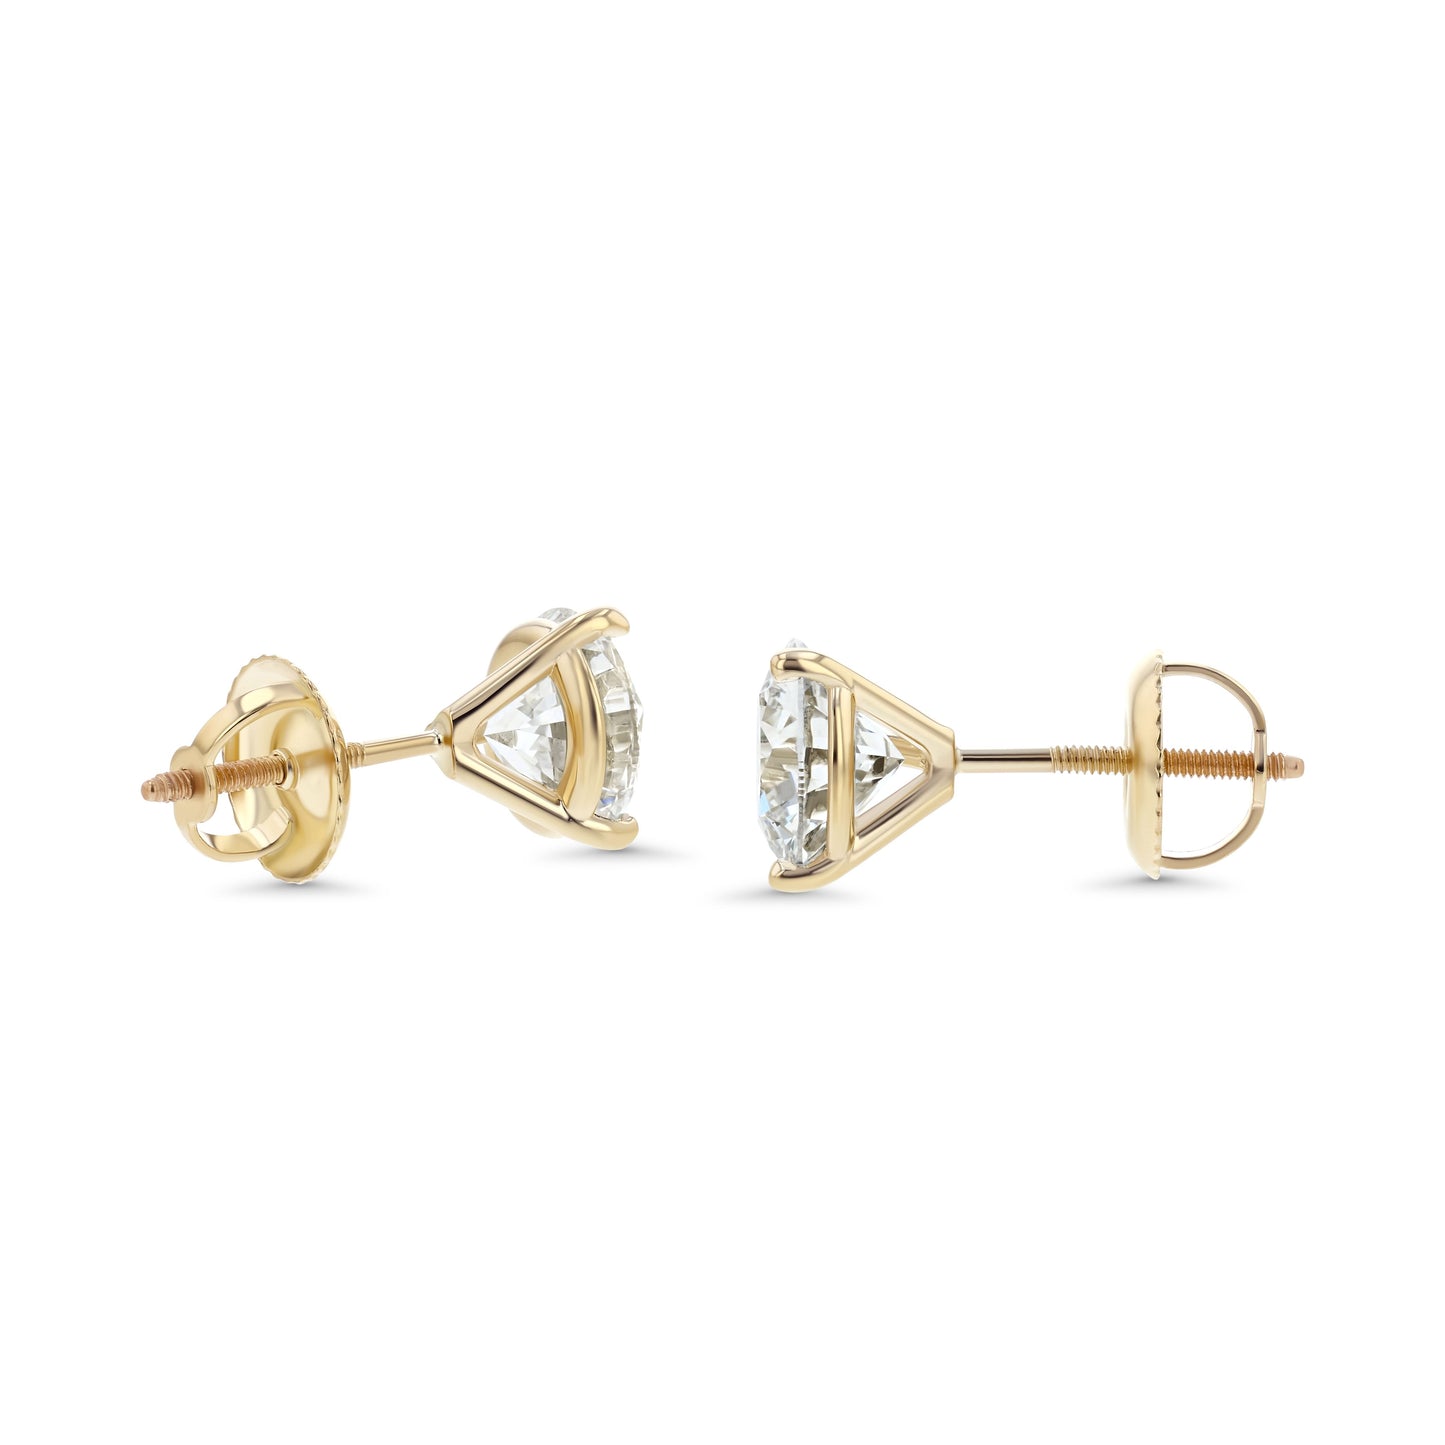 14k Yellow Gold 3-prong Martini Round Diamond Stud Earrings 1ctw (5.0mm Ea), G Color, Si3 Clarity